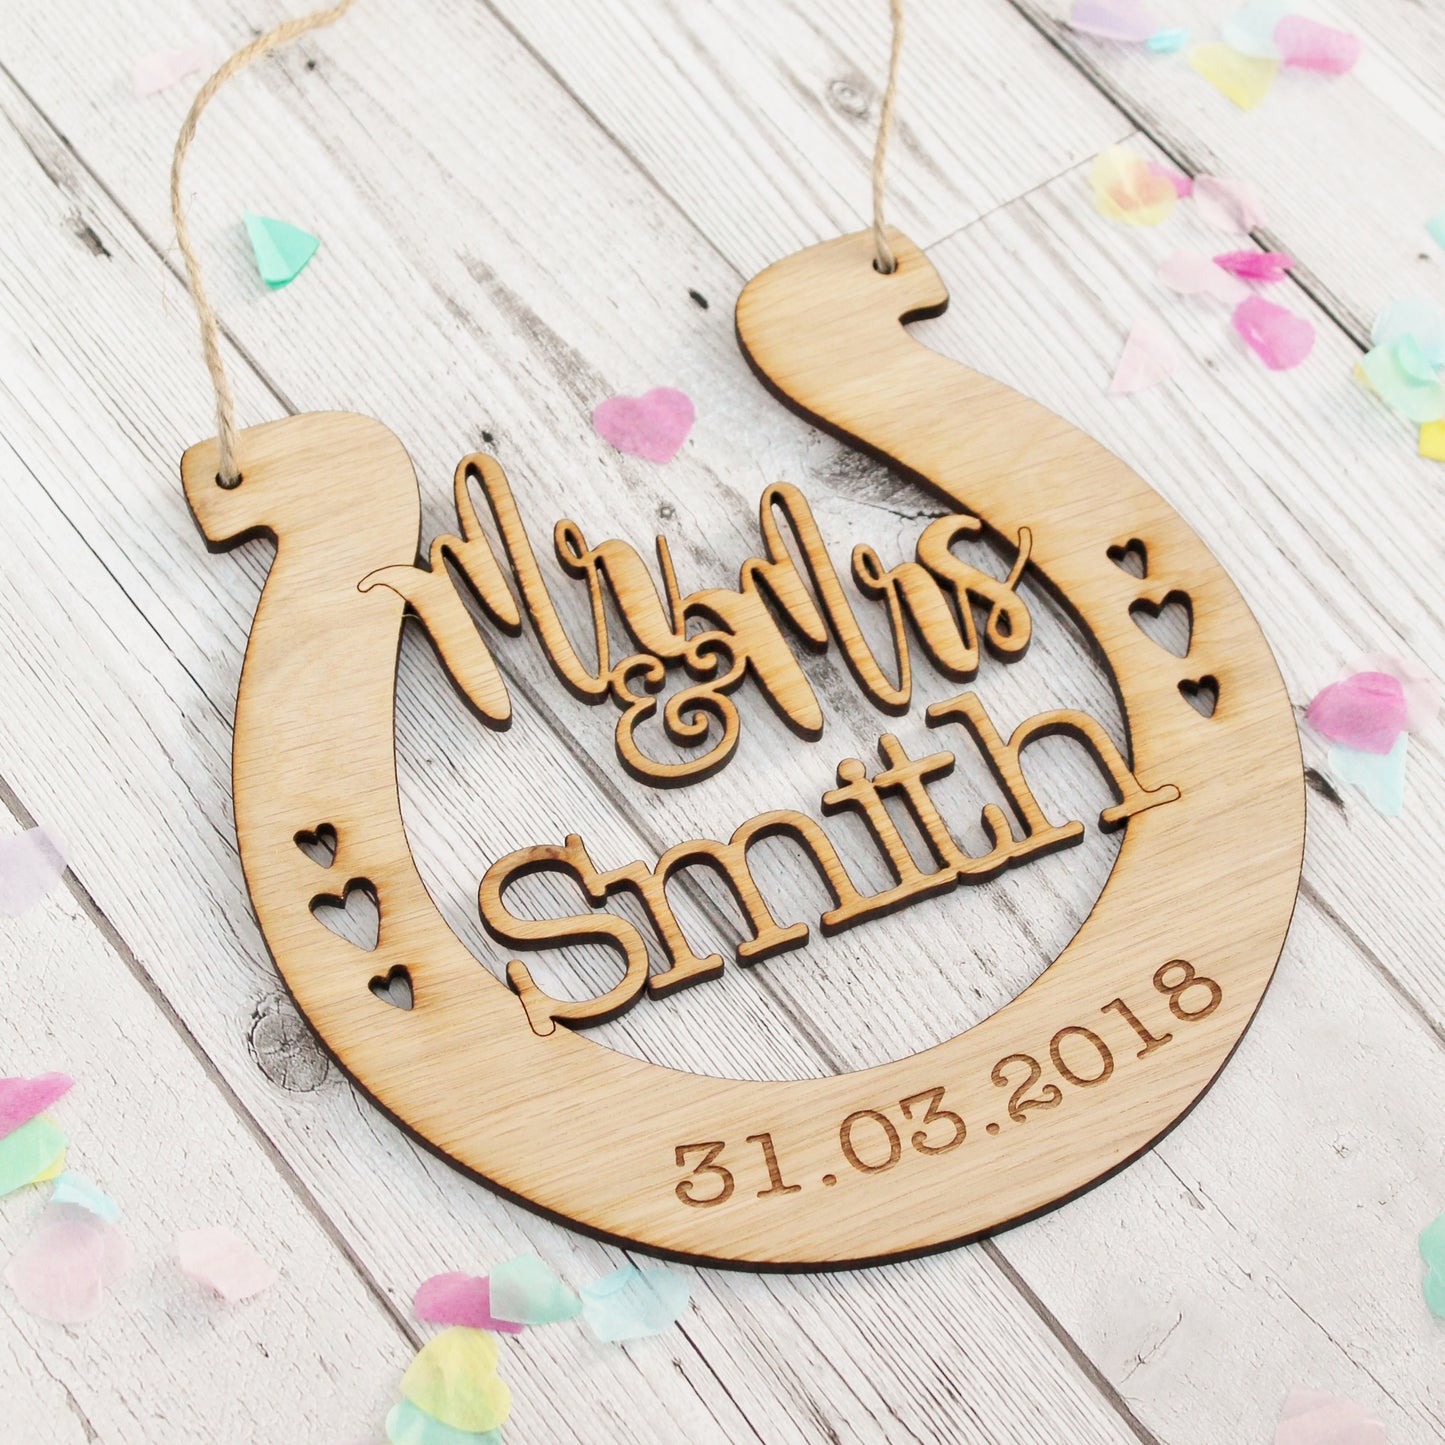 Engraved wooden horseshoe for wedding. Personalised for the bride and groom 